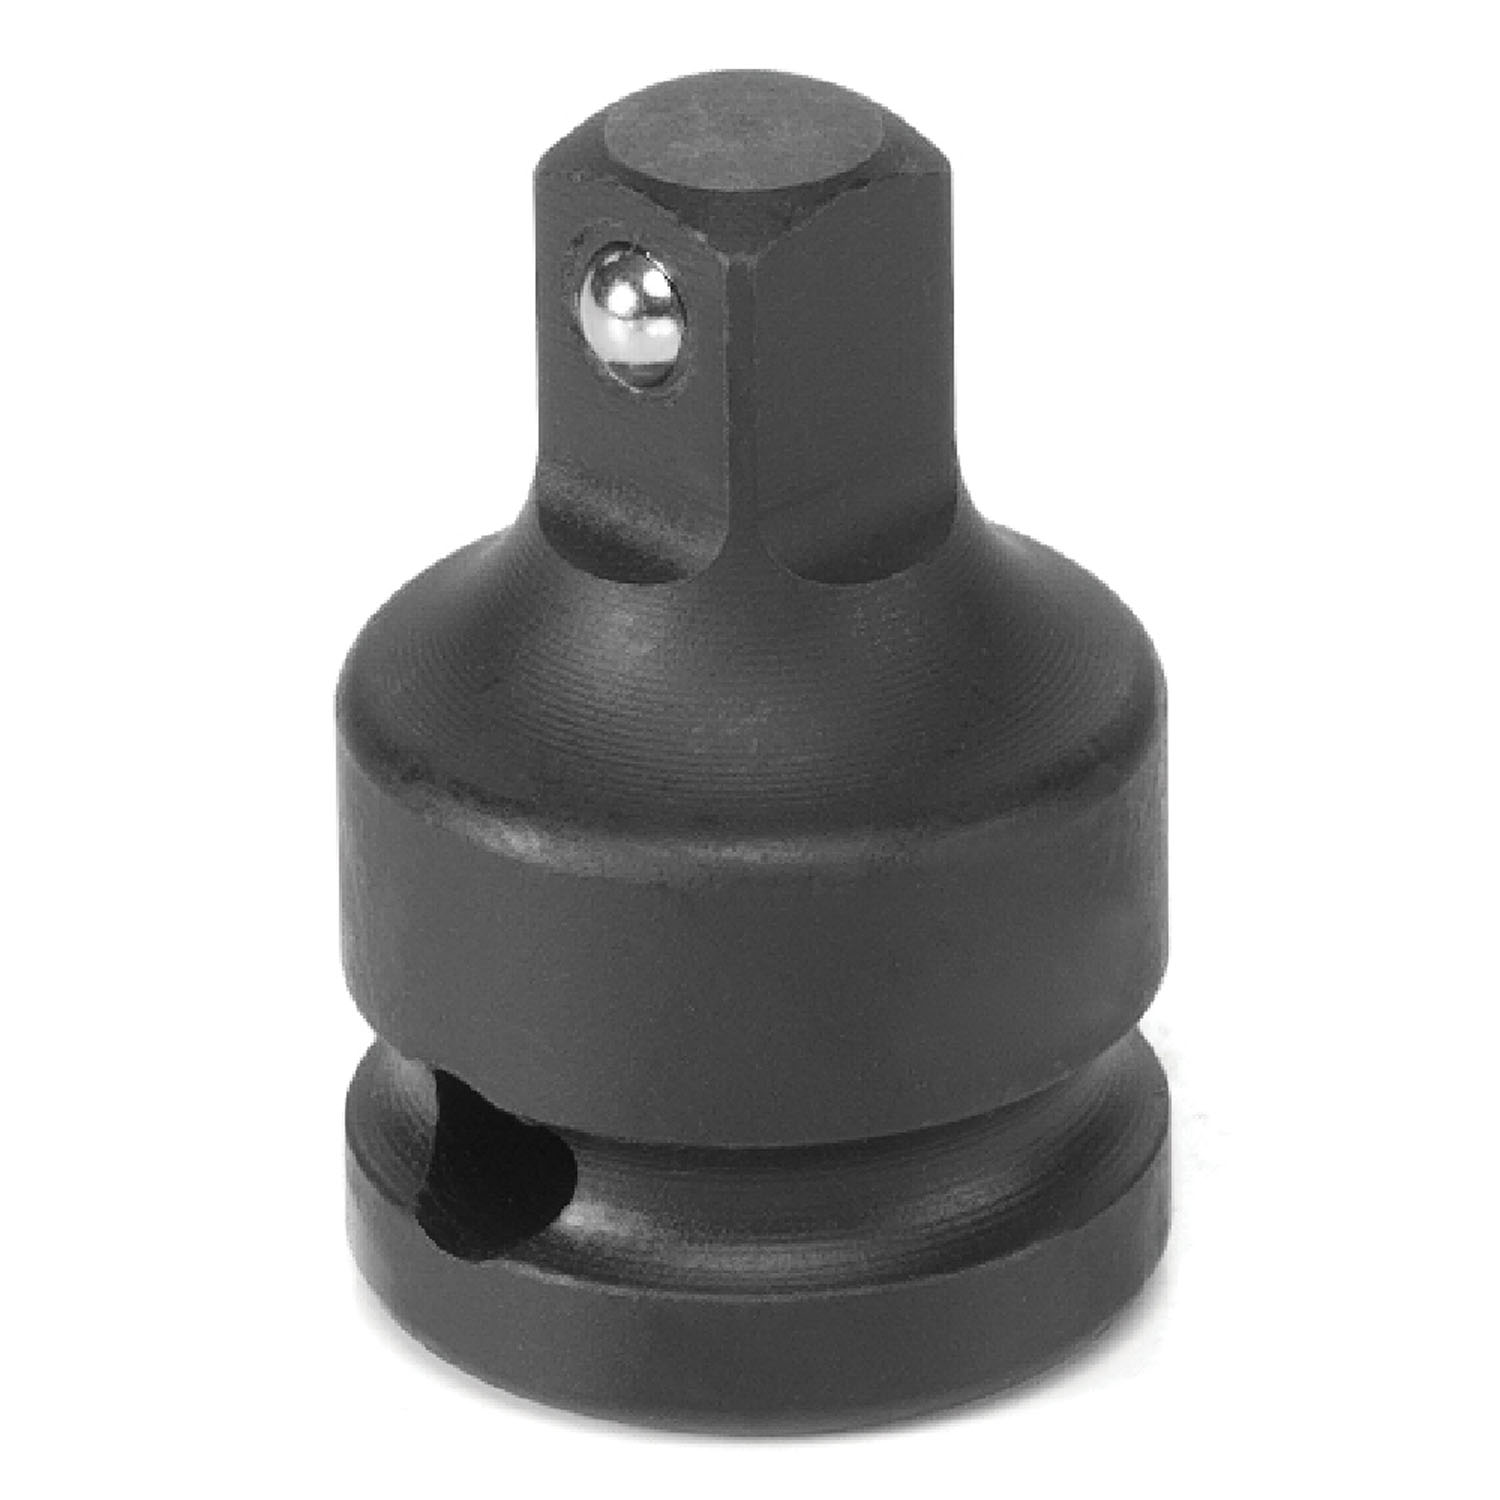 1/2 IN. DRIVE SOCKET ADAPTER WITH FRICTION BALL (MULTIPLE SIZES AVAILABLE)